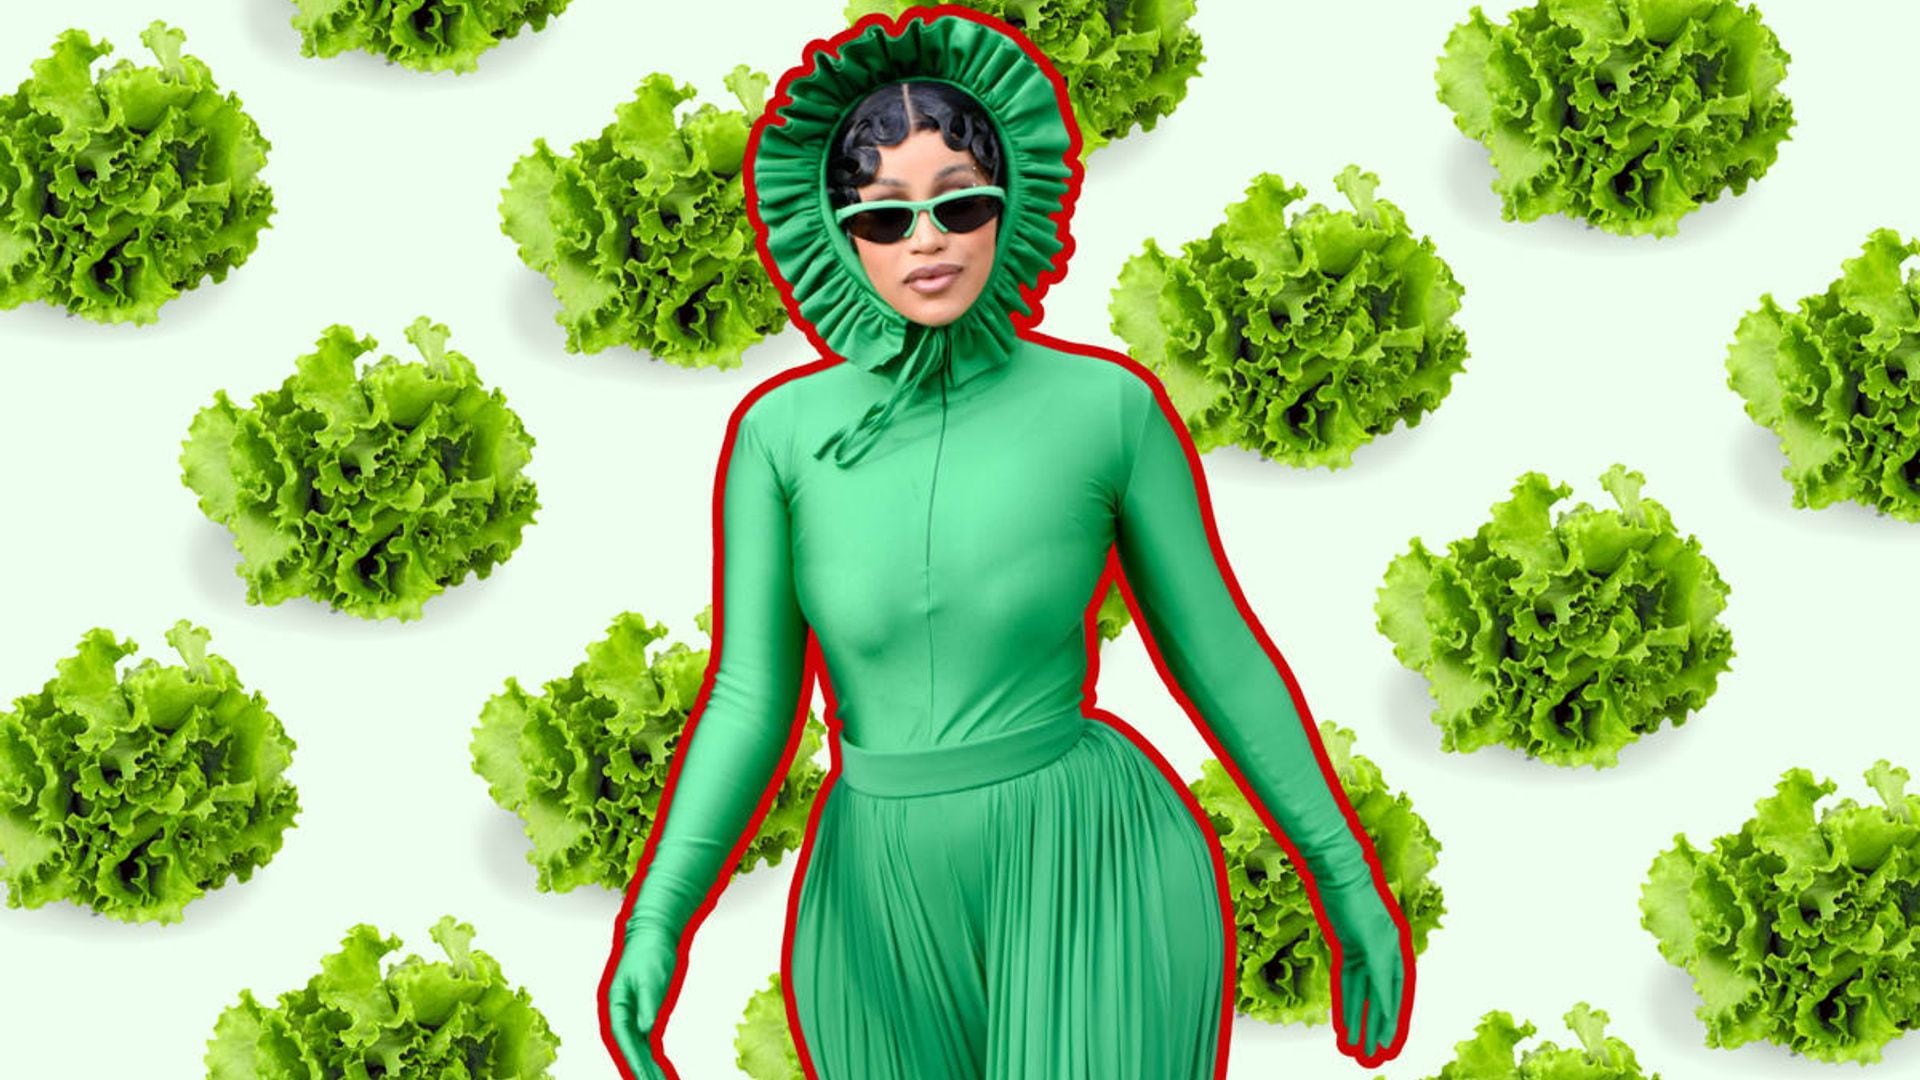 Cardi B says ‘grocery shopping prices are ridiculous’ as she spends over US$6 on a single lettuce